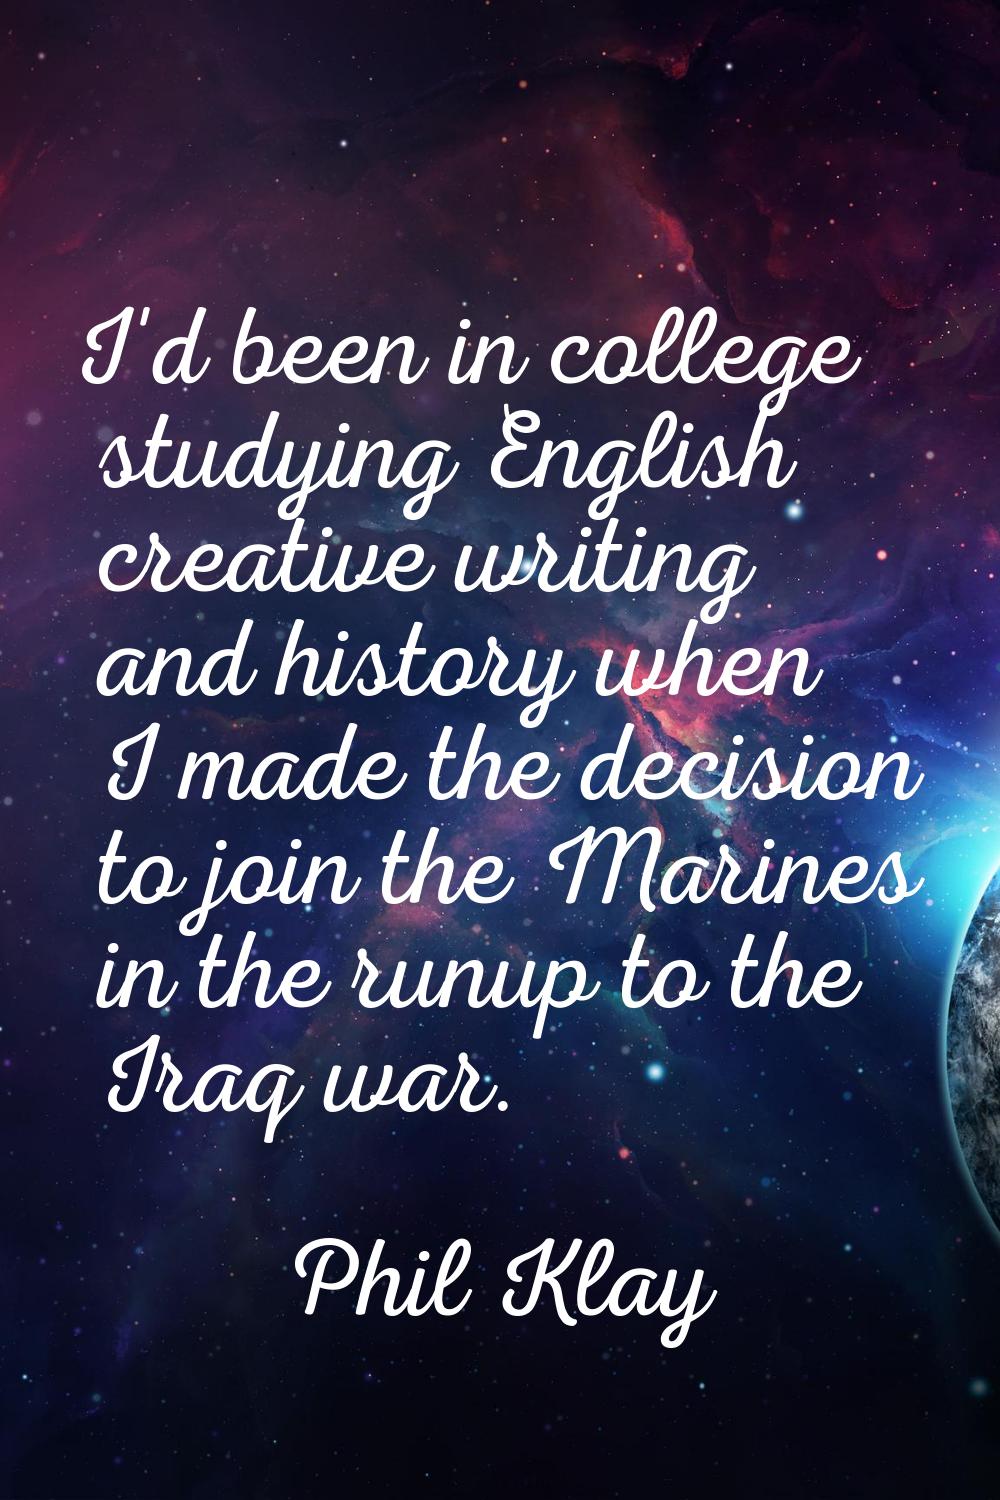 I'd been in college studying English creative writing and history when I made the decision to join 